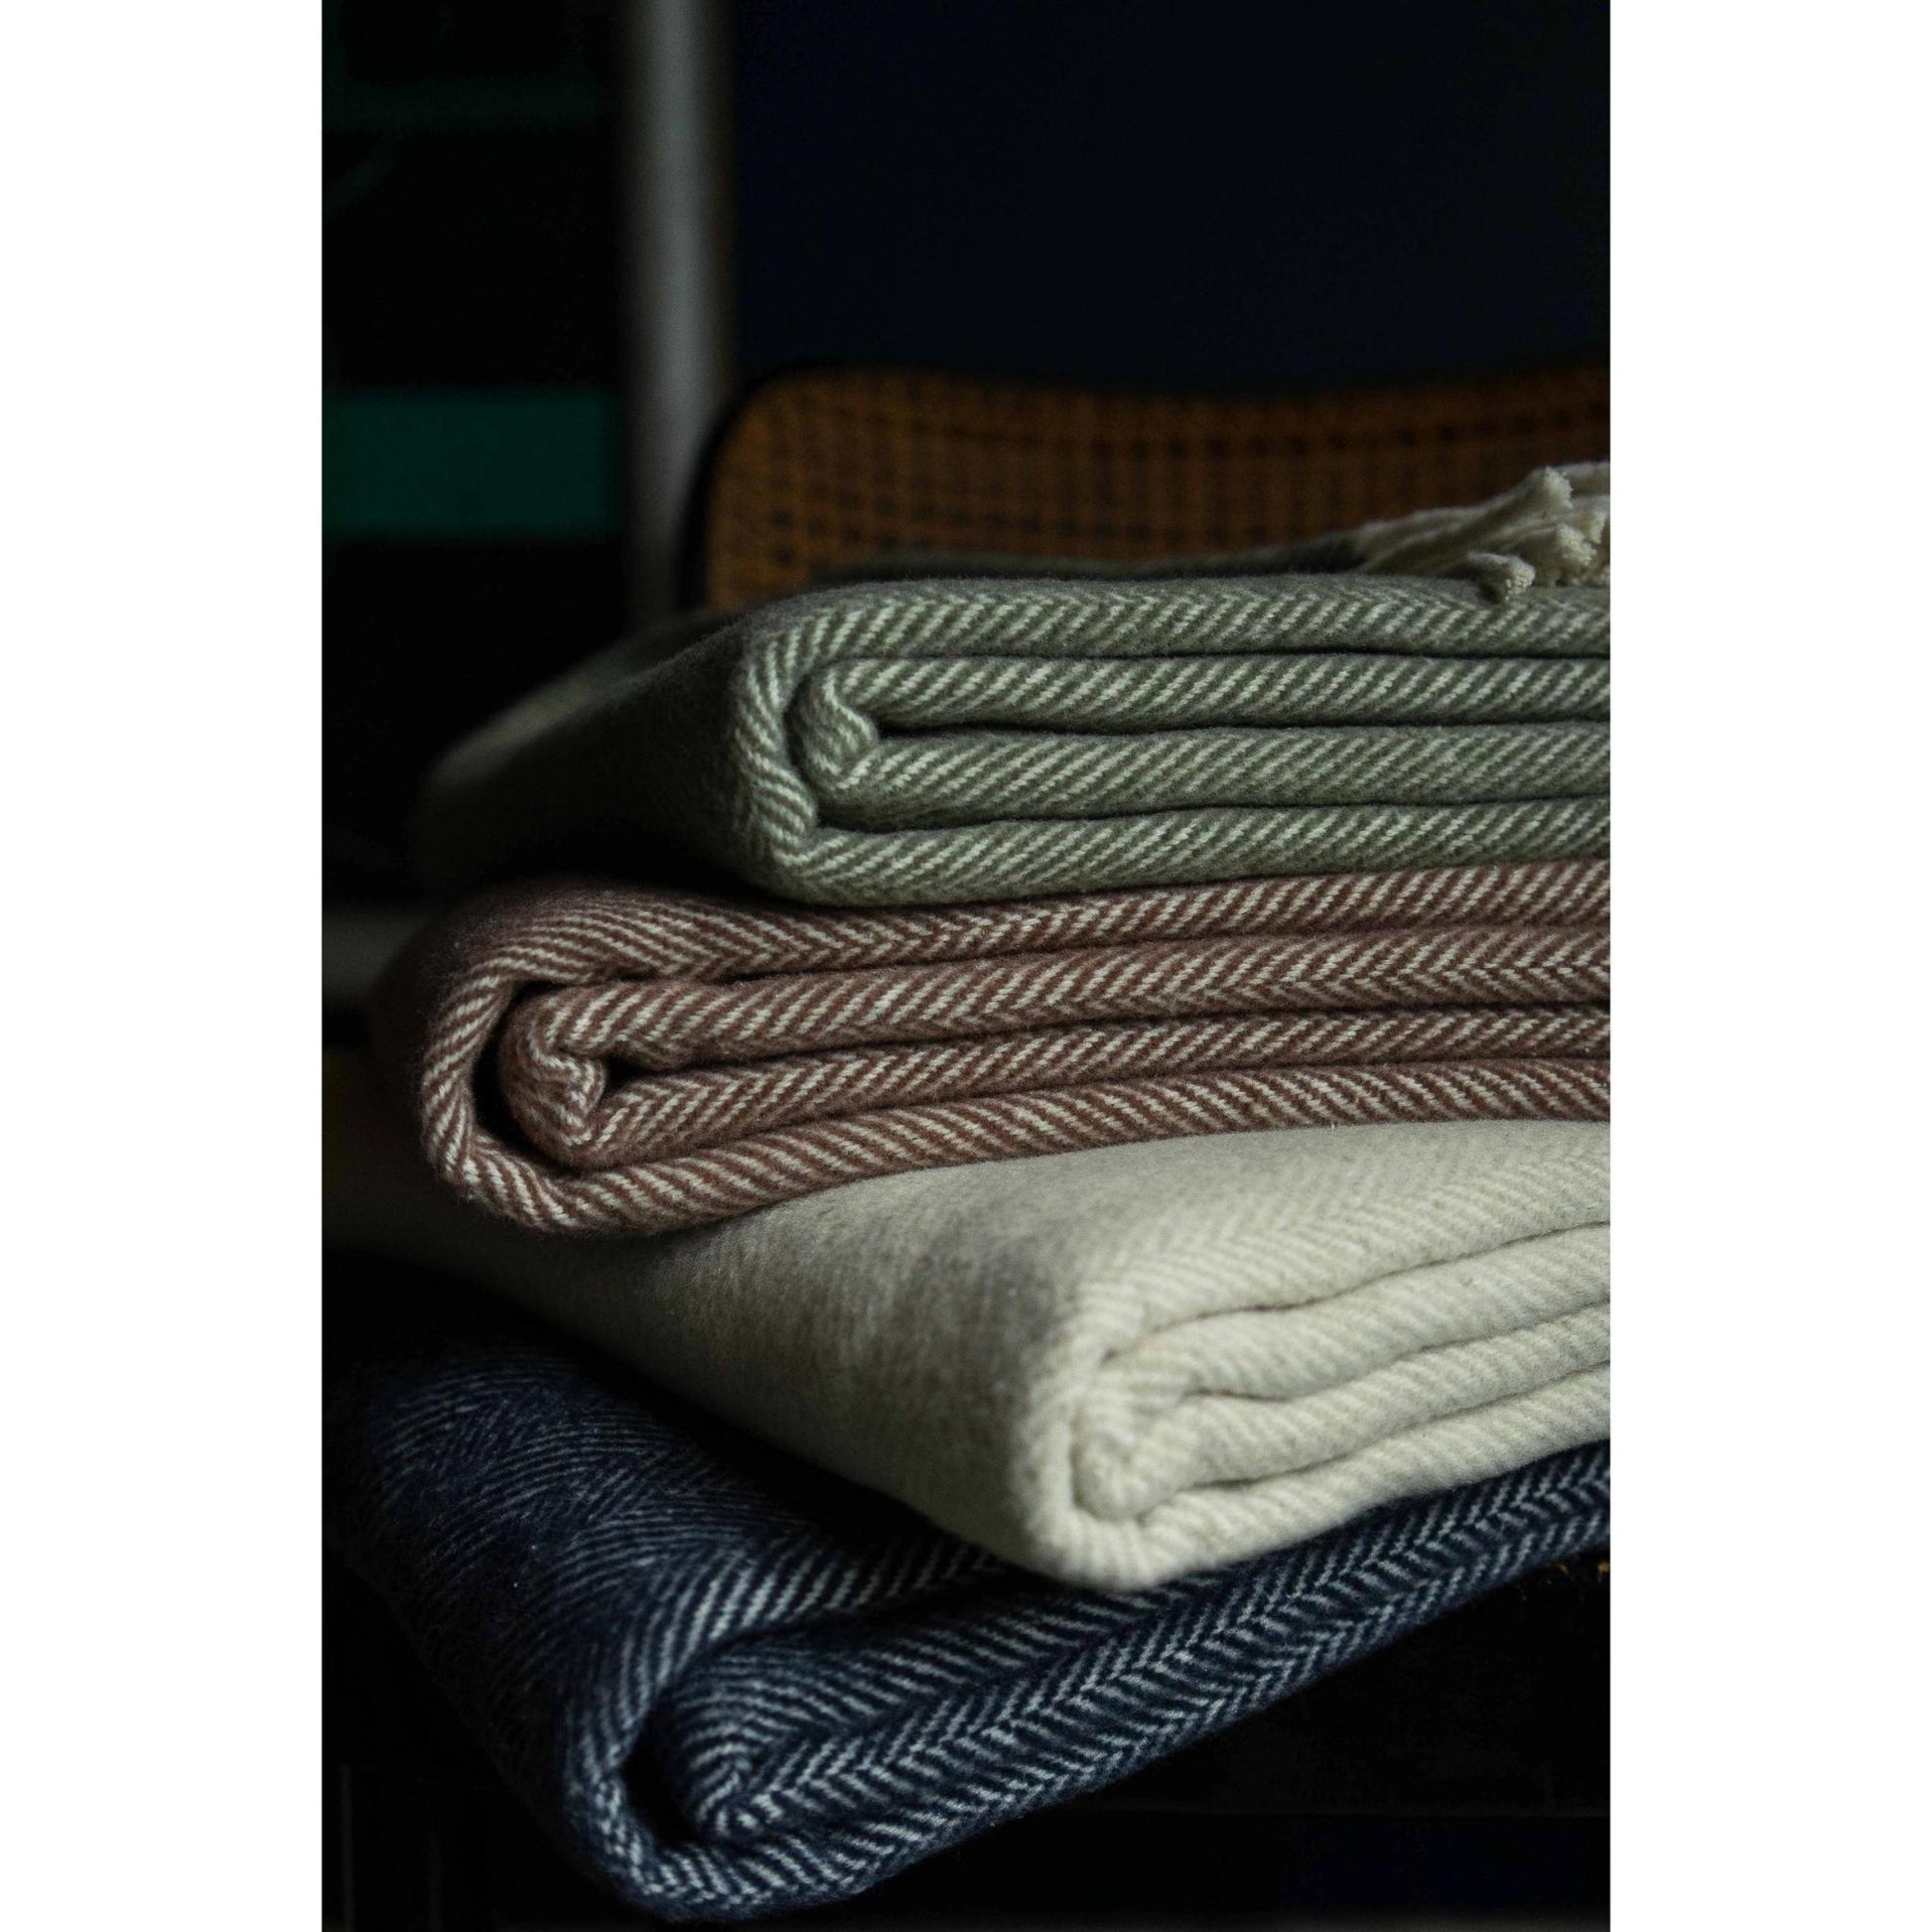 Close-up of stack of folded brushed cotton throw blankets with herringbone pattern in various colors